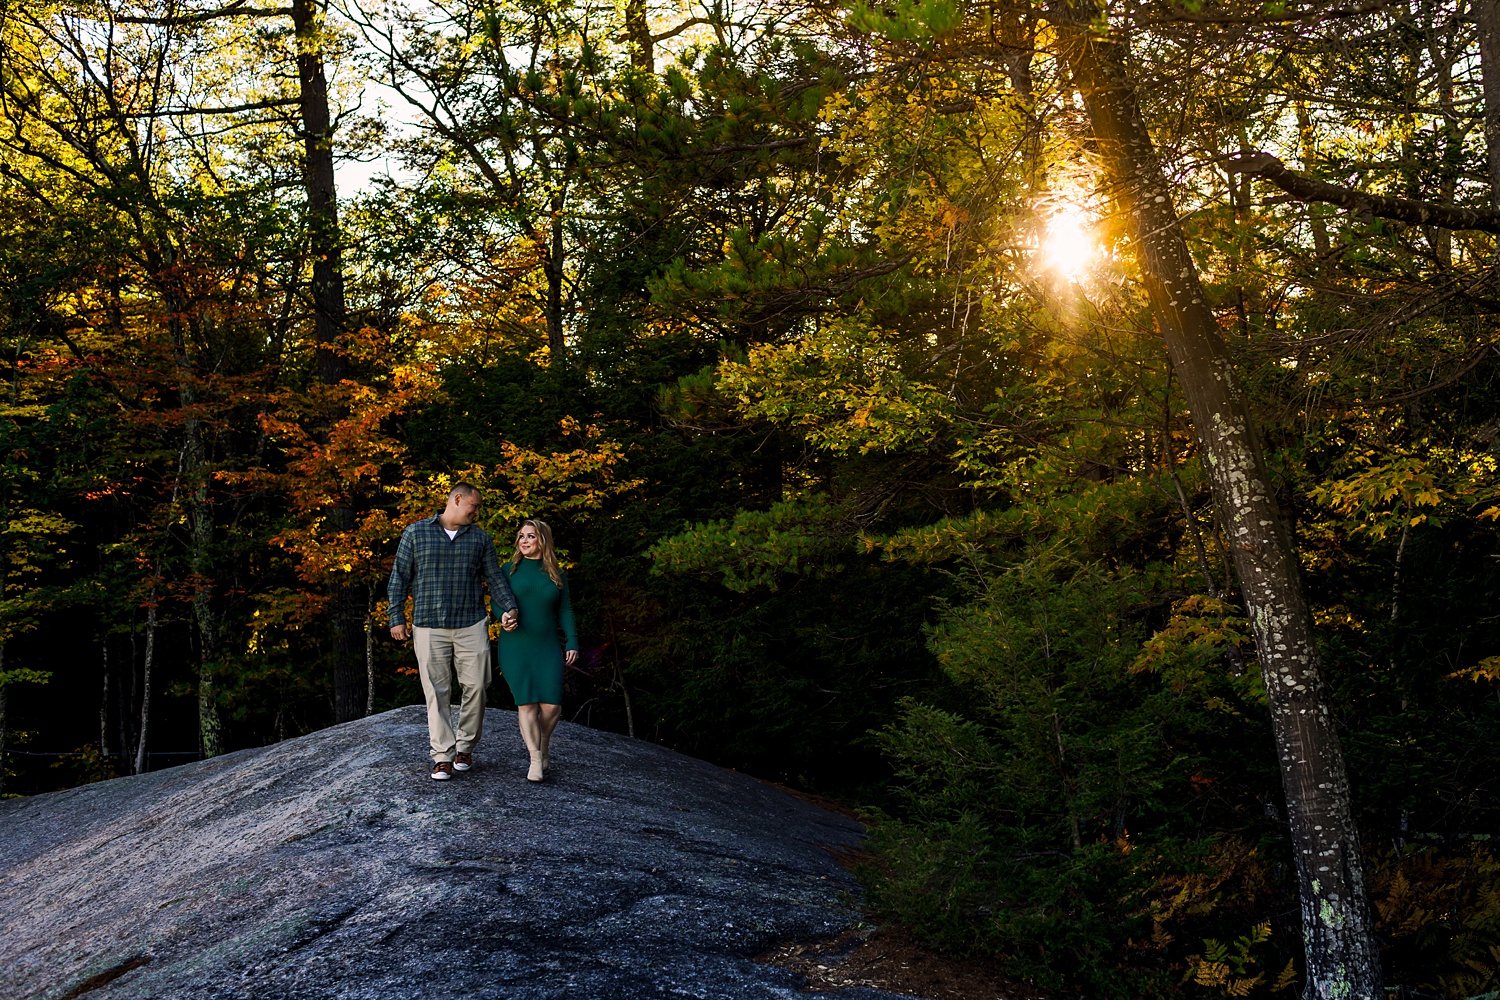 Walking in the woods of the White Mountains for their engagement session in fall